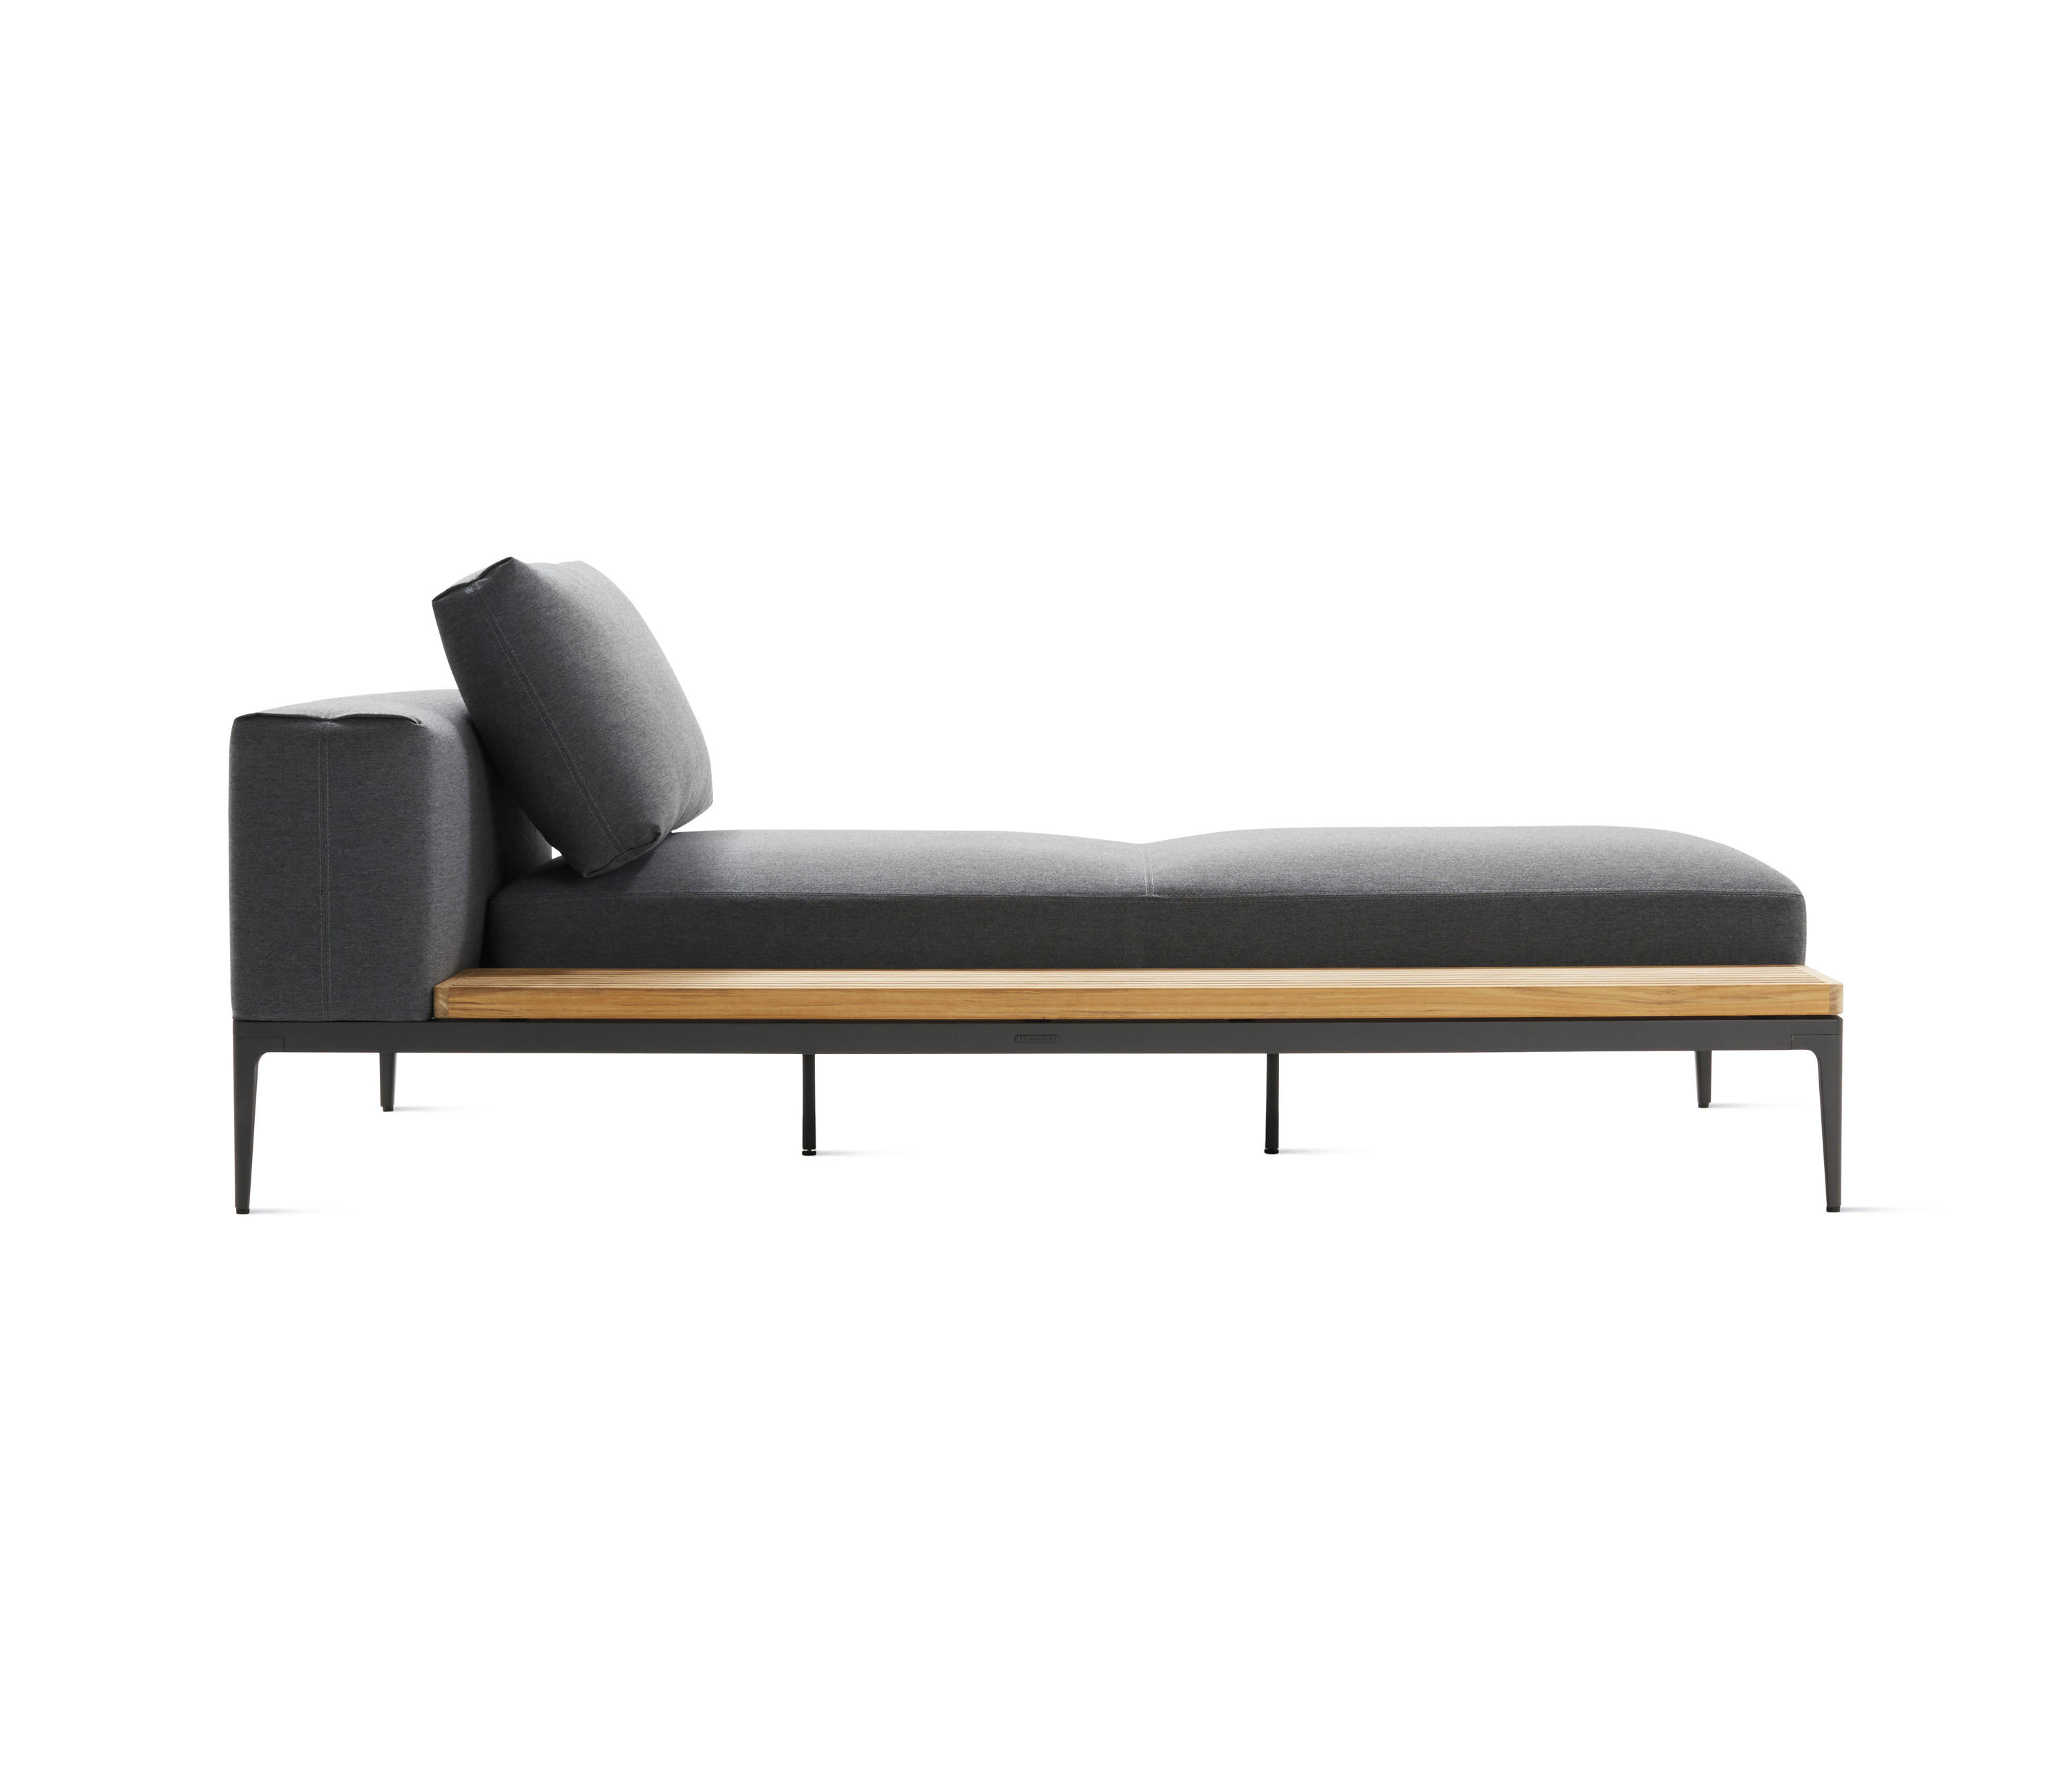 Grid Sofa with Chaise & designer furniture | Architonic